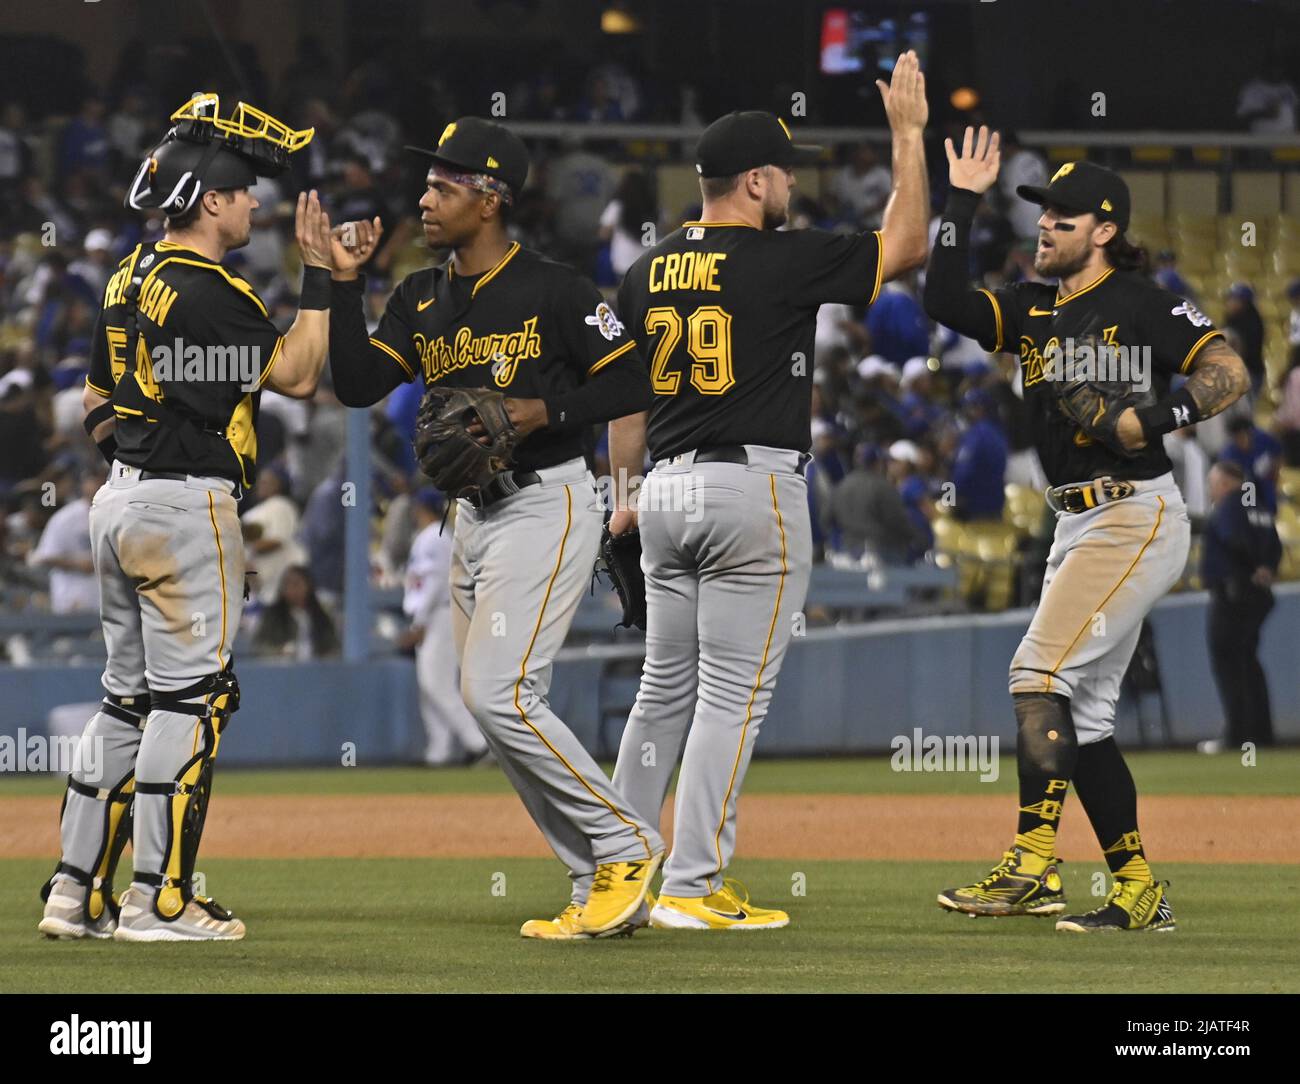 Los Angeles, United States. 01st June, 2022. Pittsburgh Pirates relief pitcher Will Crowe (29) celebrates with teammates after defeating the Los Angeles Dodgers to earn his second season save at Dodger Stadium in Los Angeles on Tuesday, May 31, 2022. The Prates beat the Dodgers 5-3 for their second series win. Photo by Jim Ruymen/UPI Credit: UPI/Alamy Live News Stock Photo